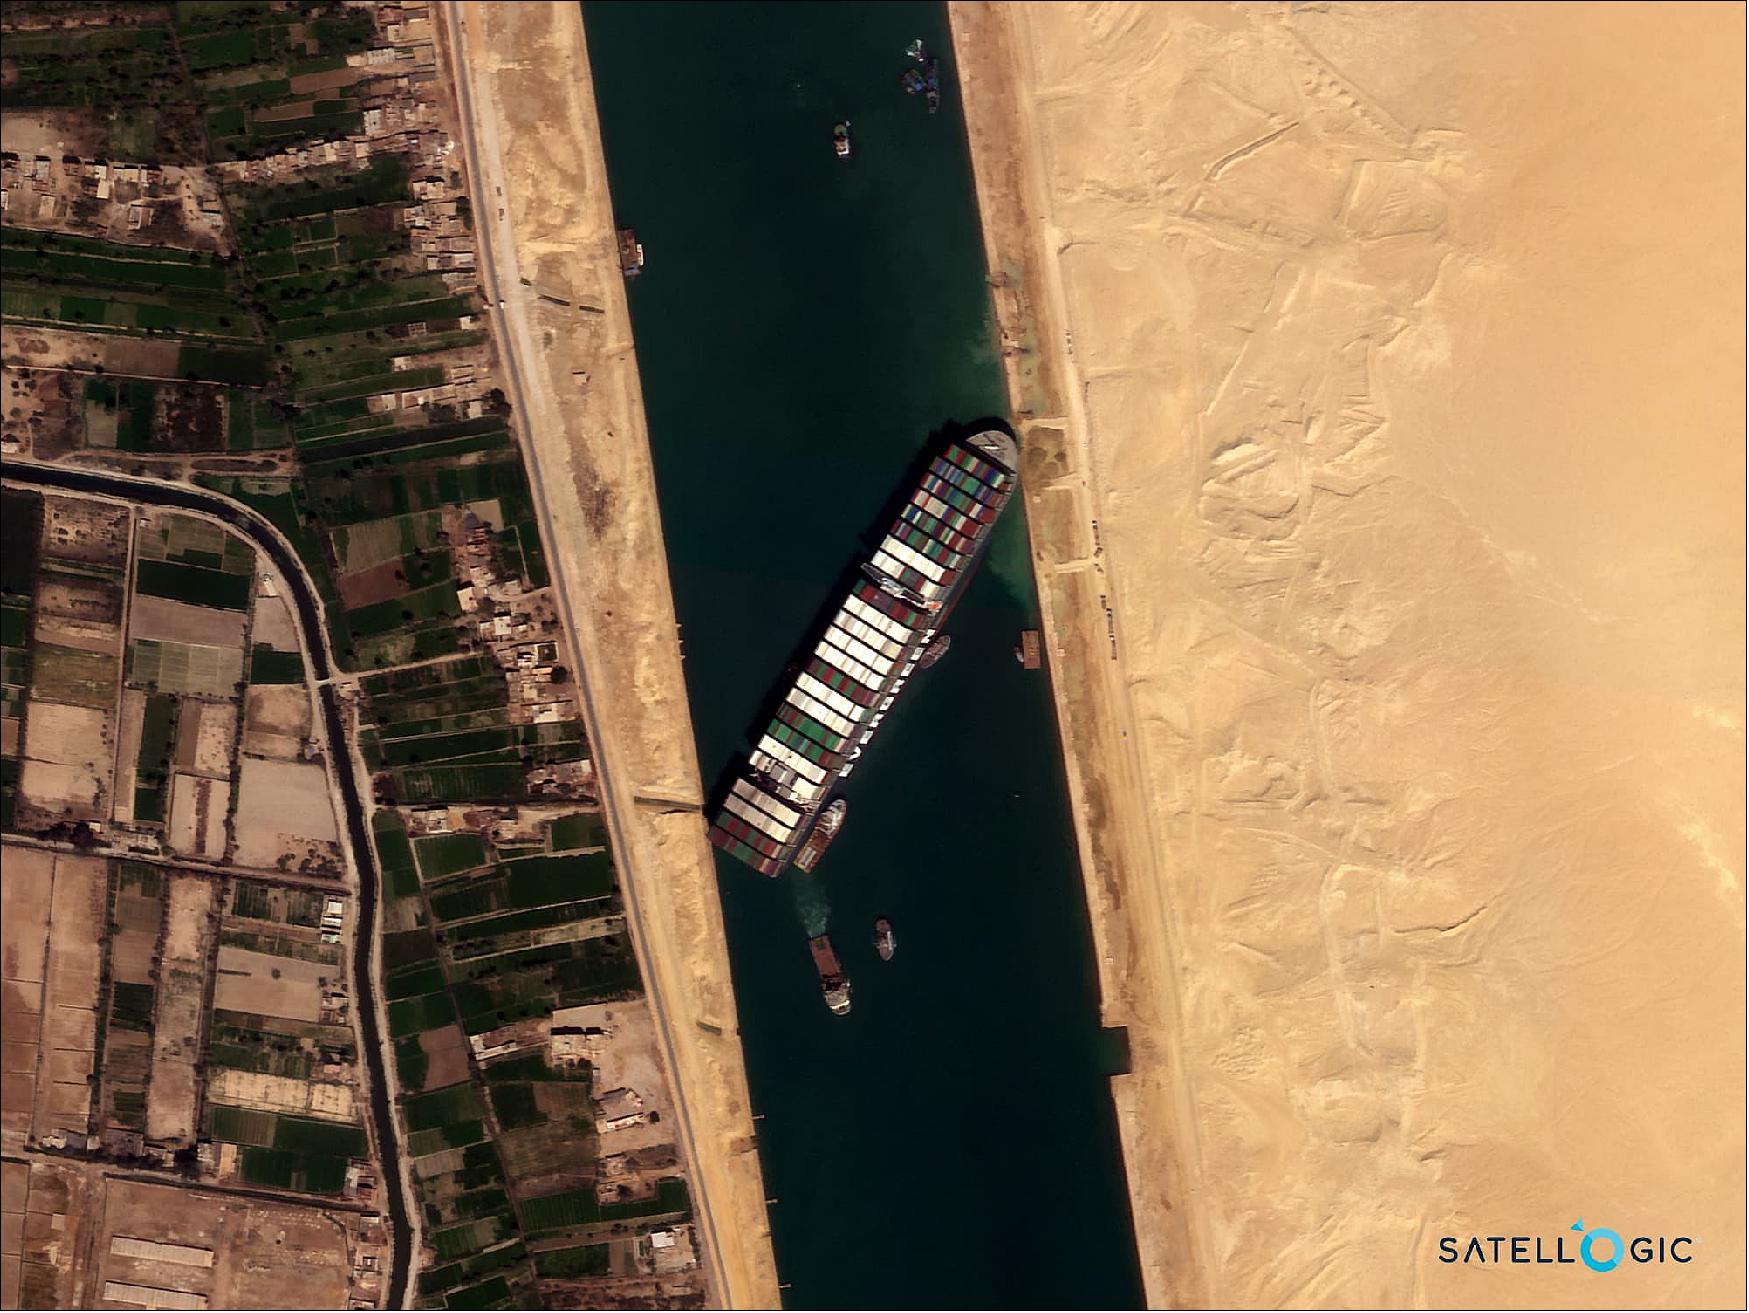 Figure 9: The Ever Given container ship is stuck in the Suez Canal of Egypt as observed by Satellogic-ÑuSat on March 25, 2021 (image credit: Satellogic-ÑuSat) 20)